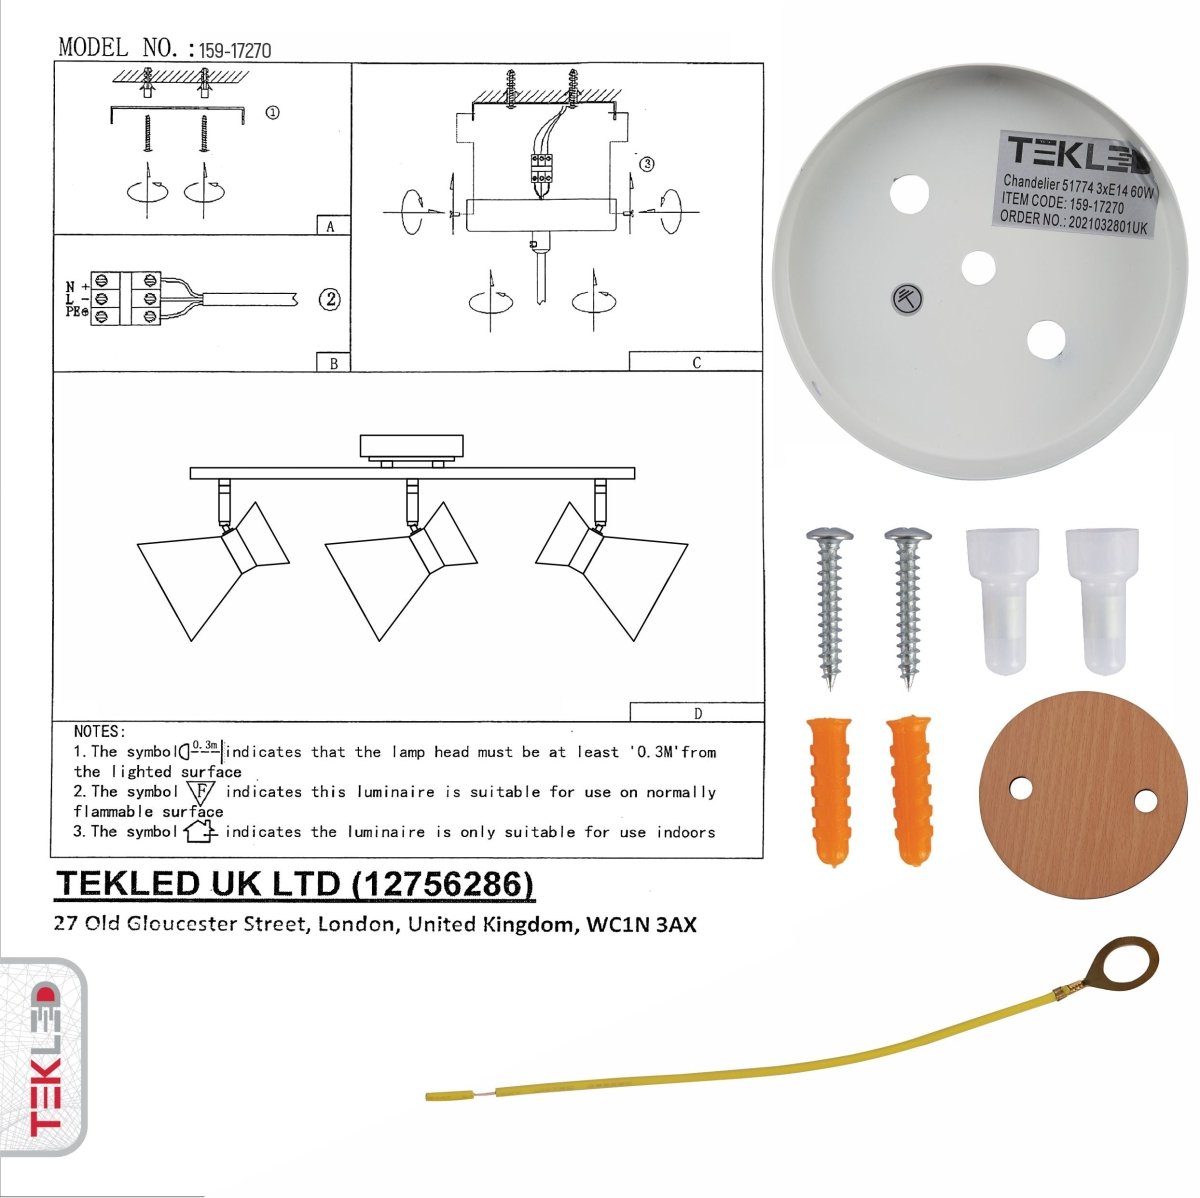 User manual and box content of white metal wood funnel semi flush ceiling light 3xe14